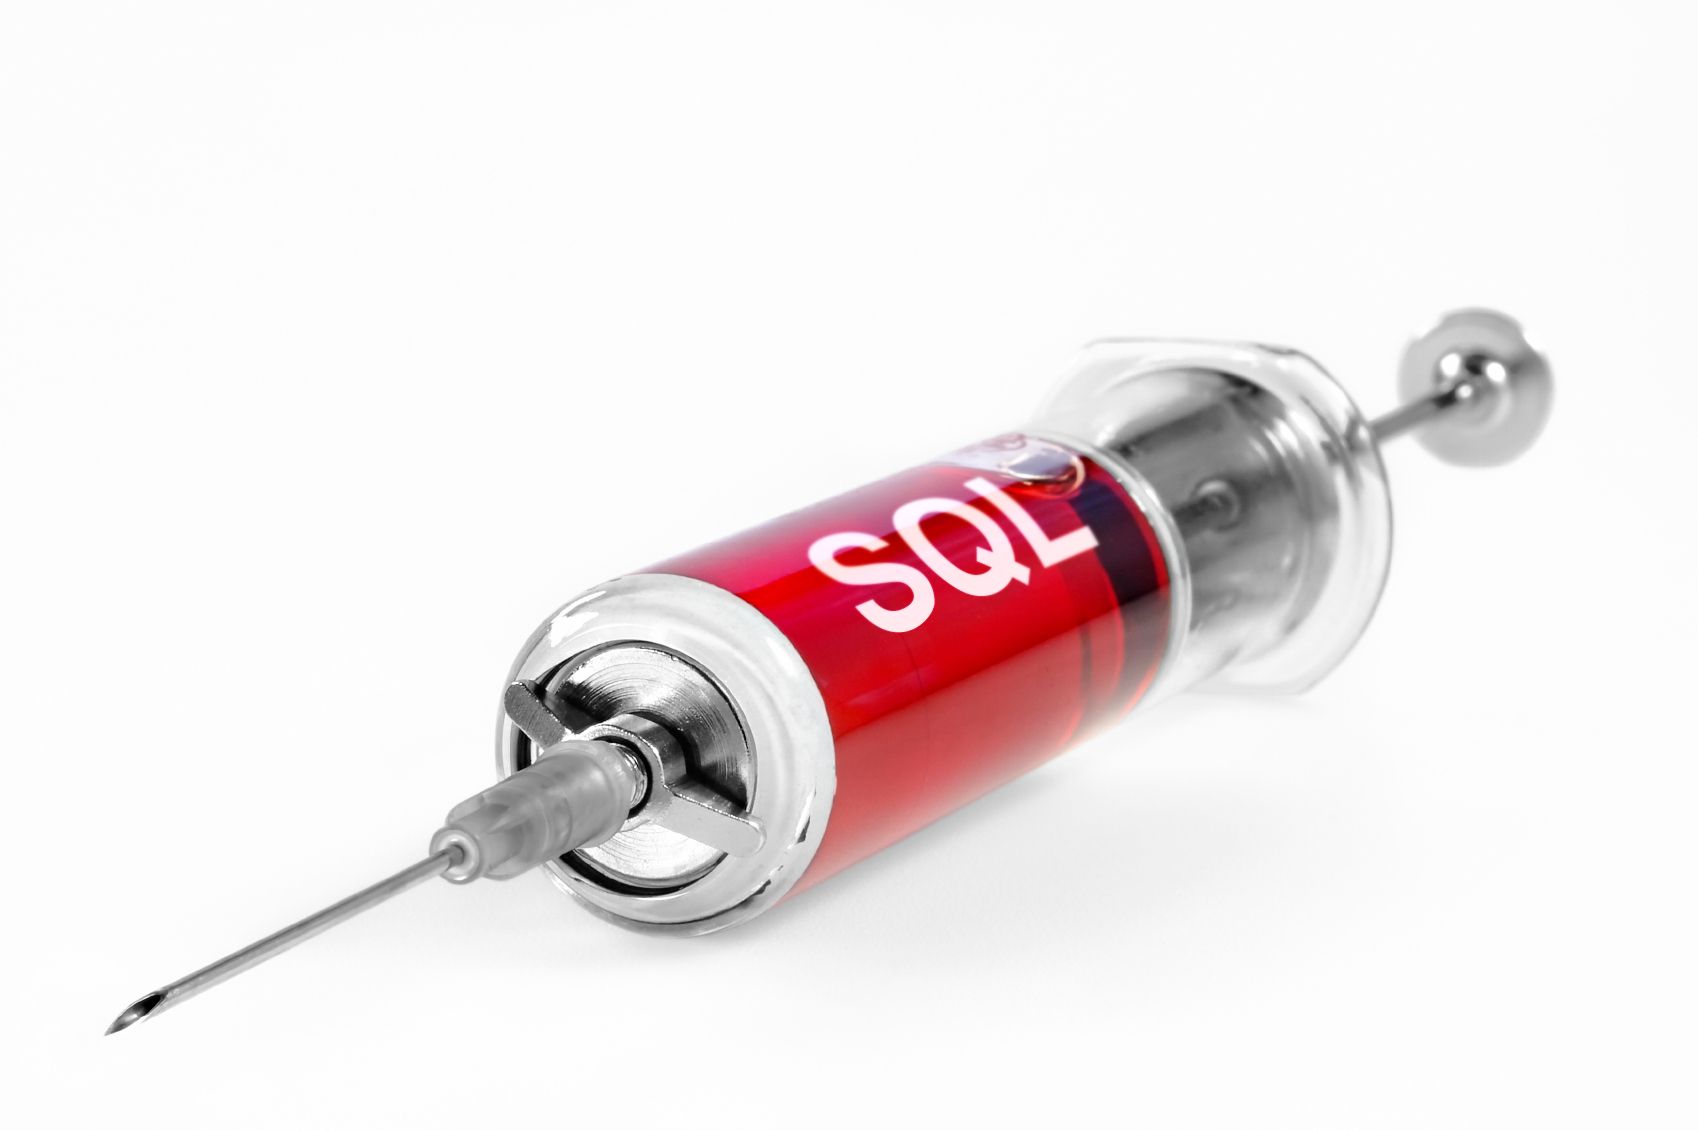 Automated downfall check for the code. Quick SQL-injections search